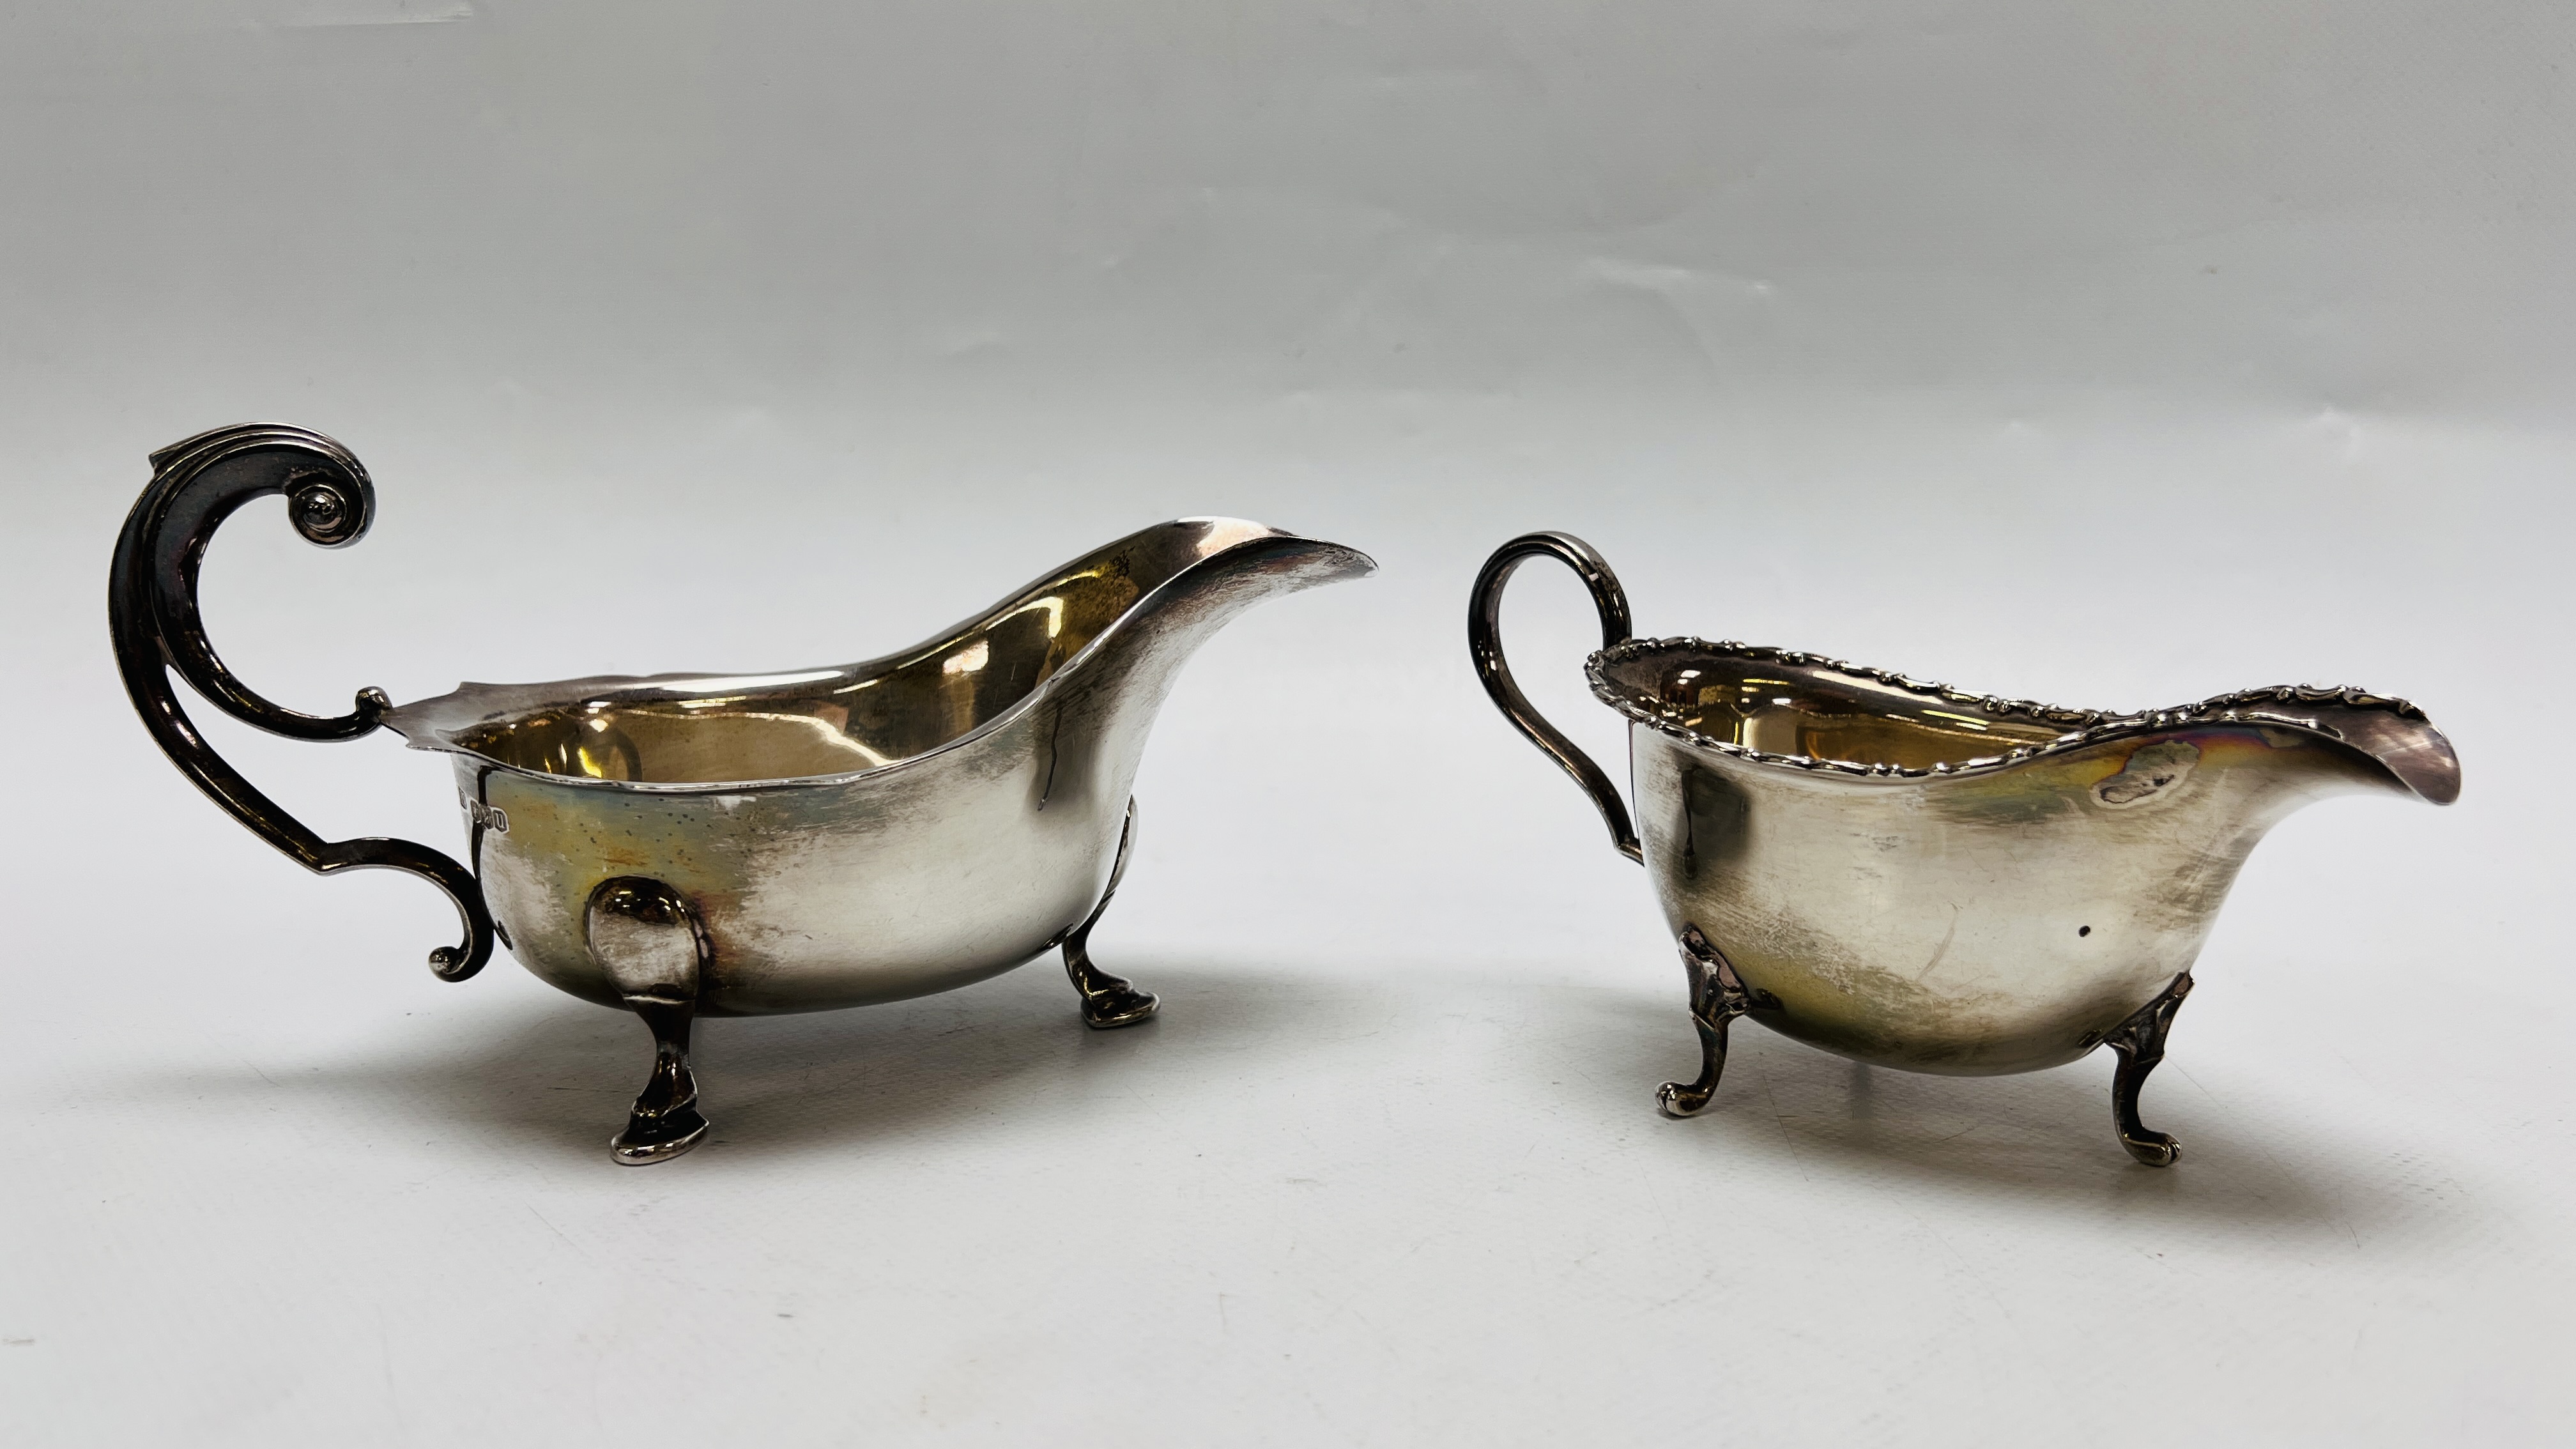 TWO SILVER SAUCE BOATS IN THE C18TH.